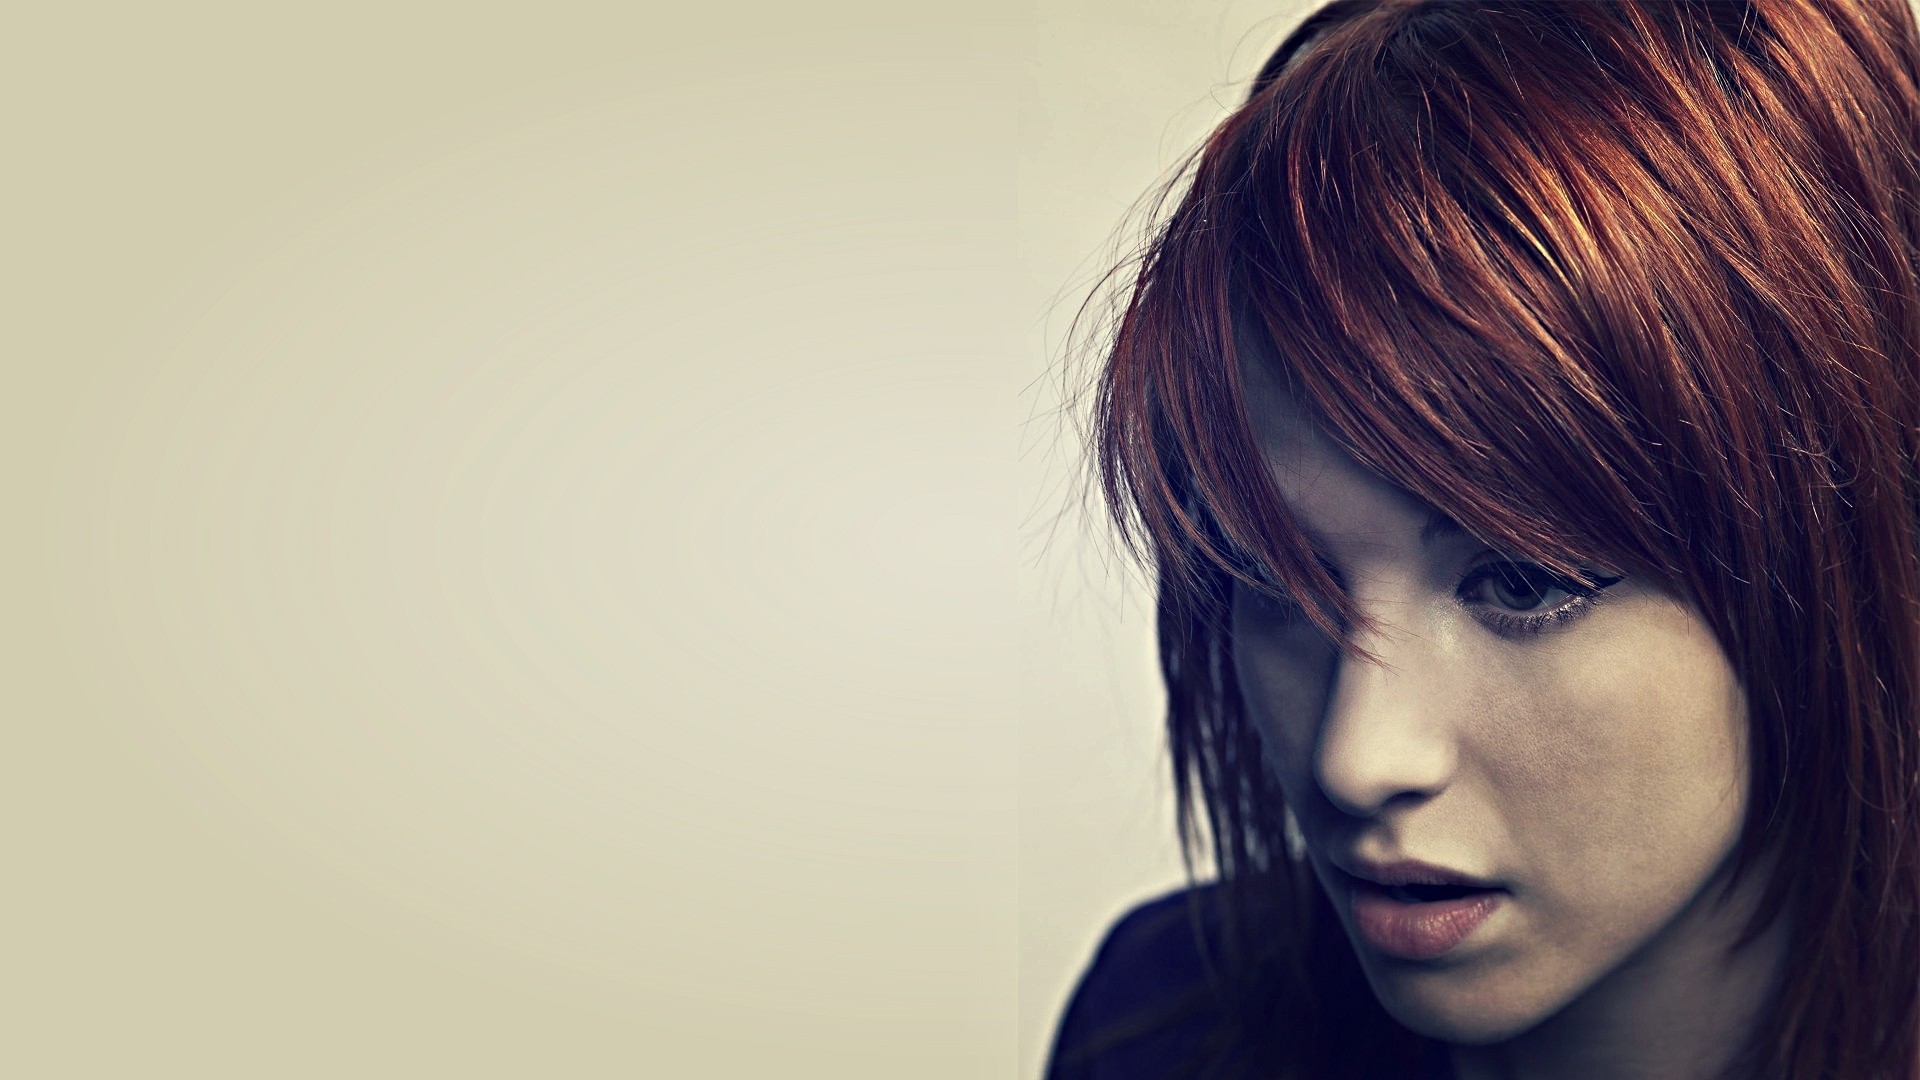 1920x1080  Wallpaper hayley williams, paramore, person, singer, redhead